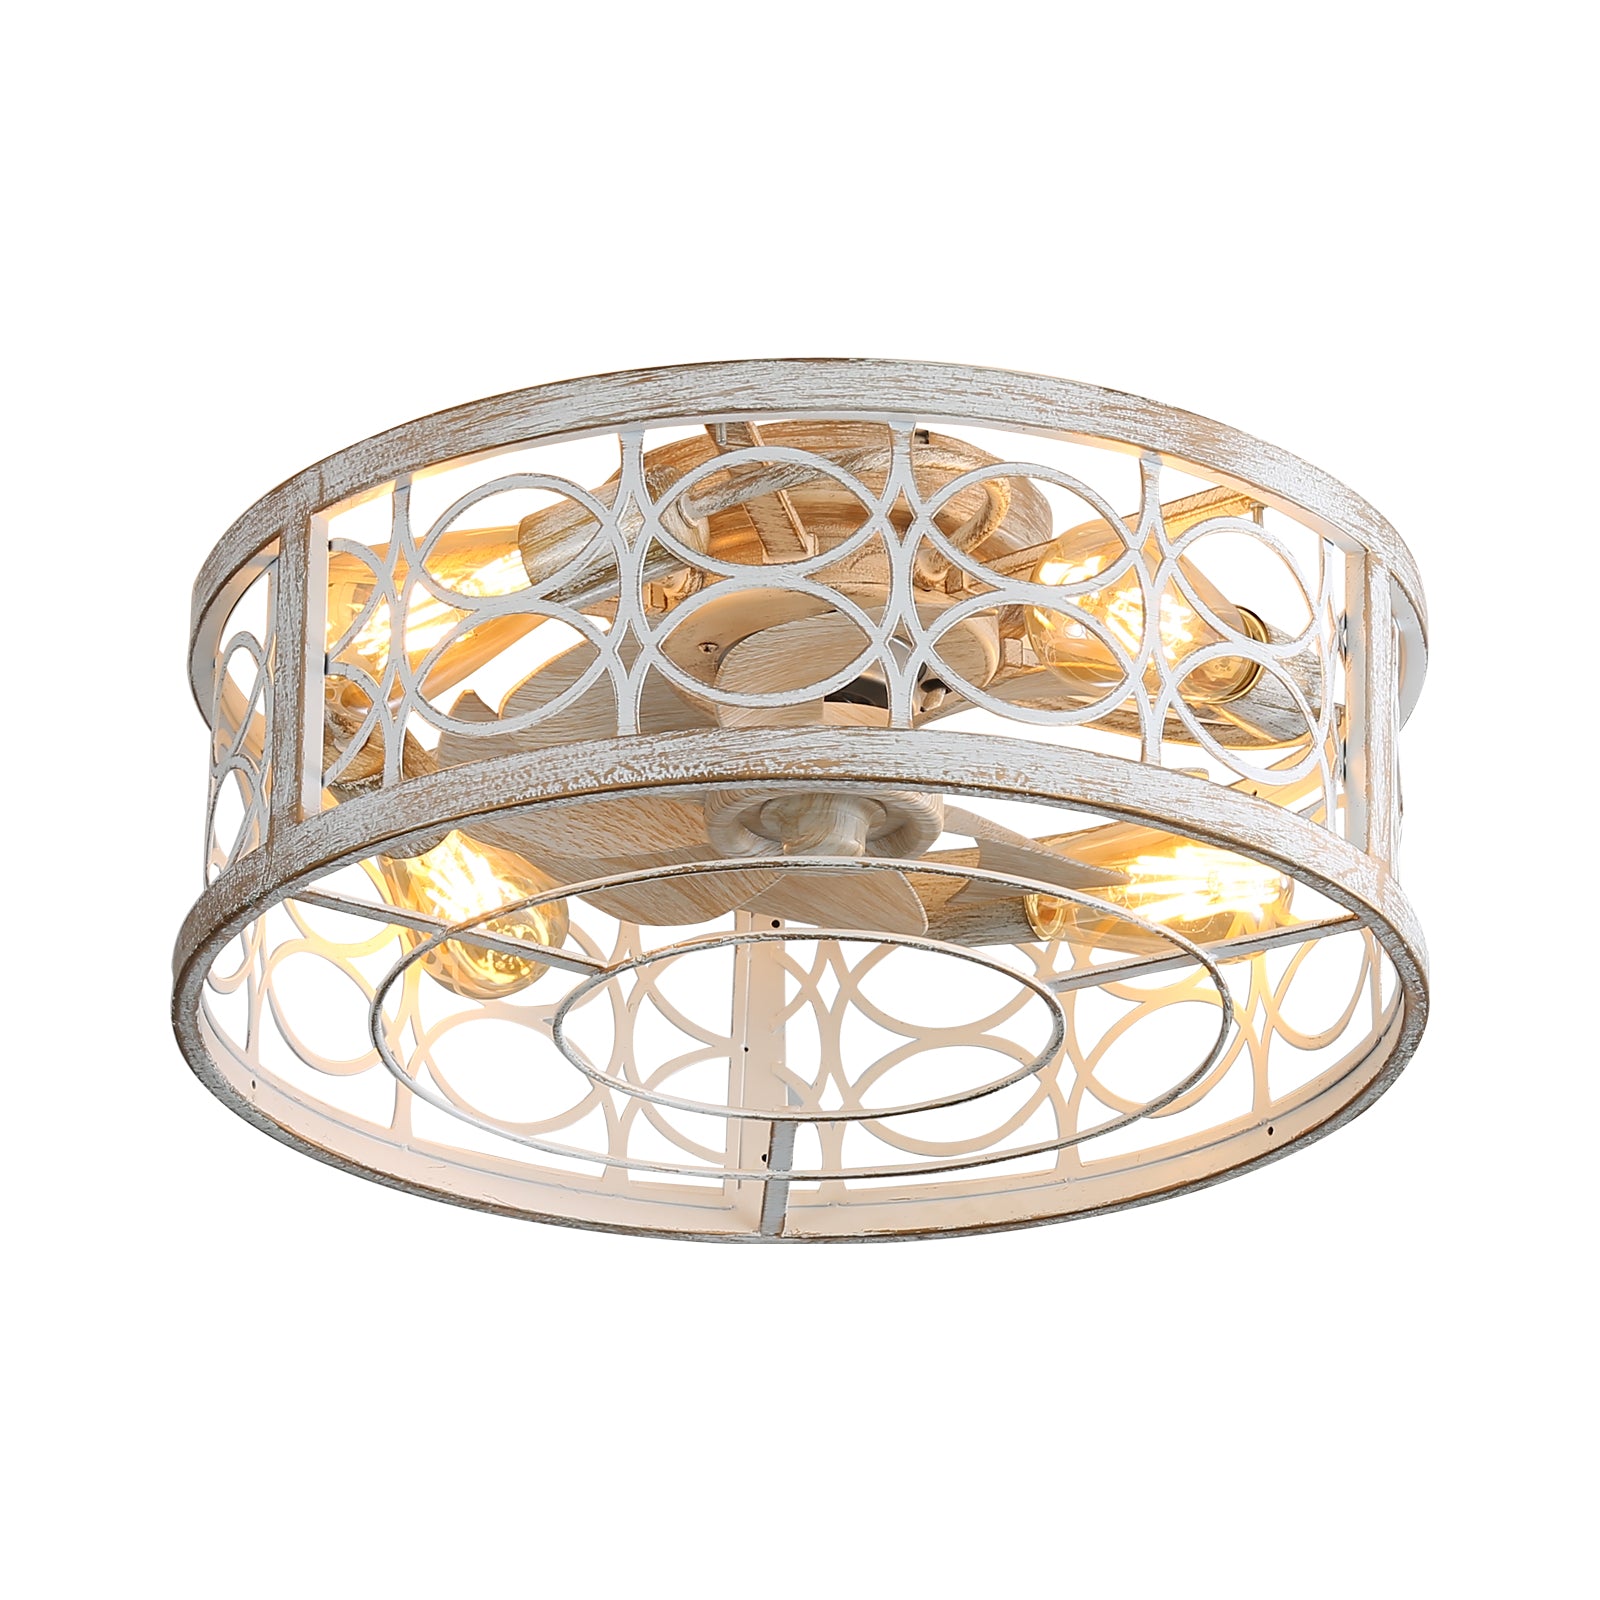 REYDELUZ 20" Caged Ceiling Fan with Light.